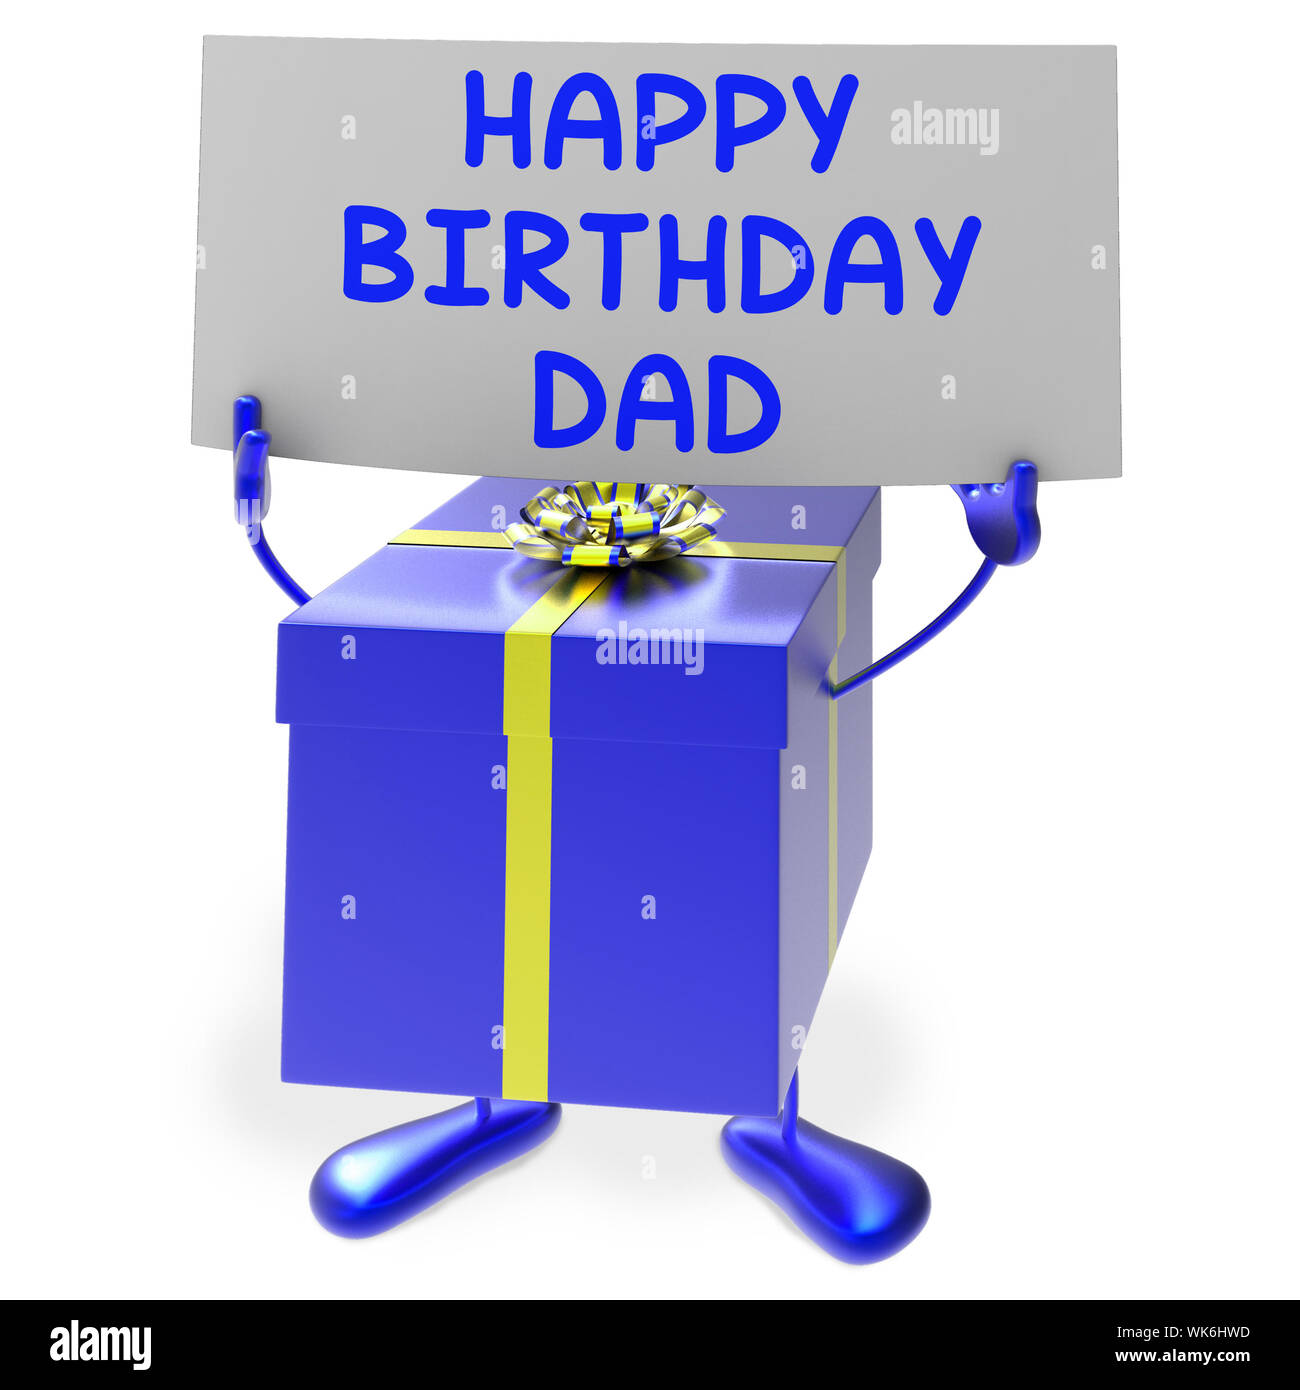 Happy Birthday Dad Meaning Presents for Father Stock Photo - Alamy